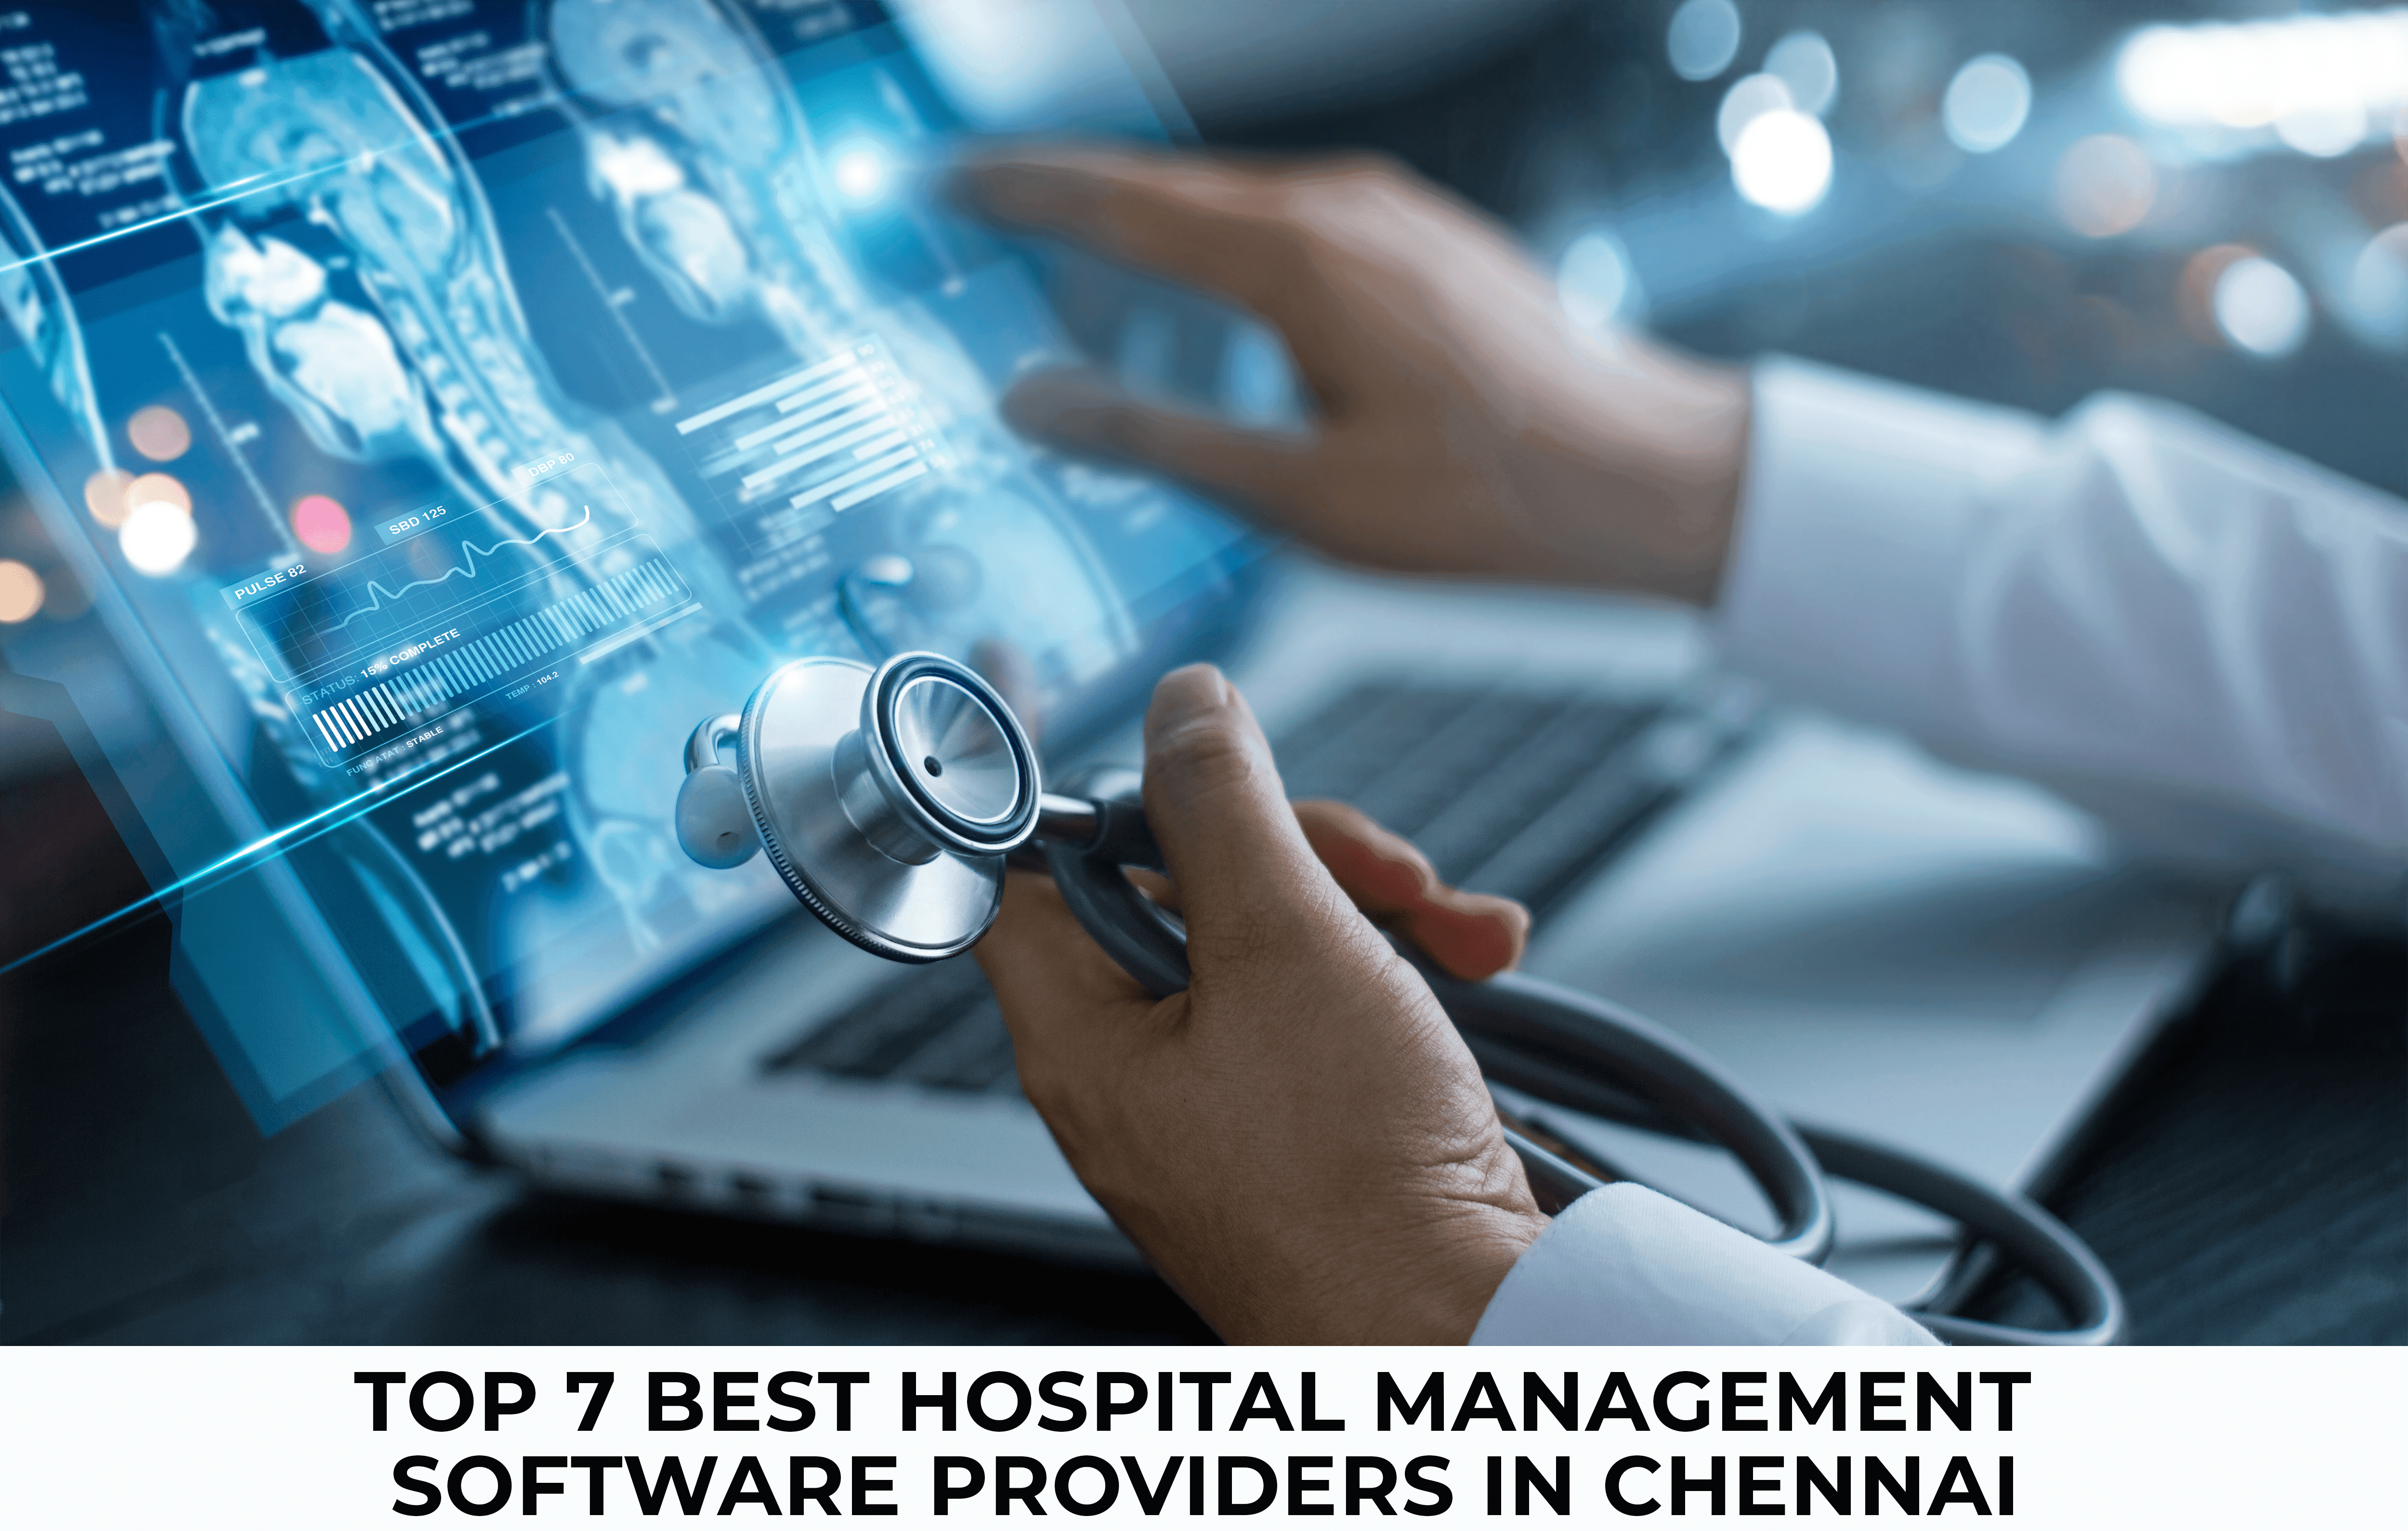 Top 7 Best Hospital Management software providers in Chennai